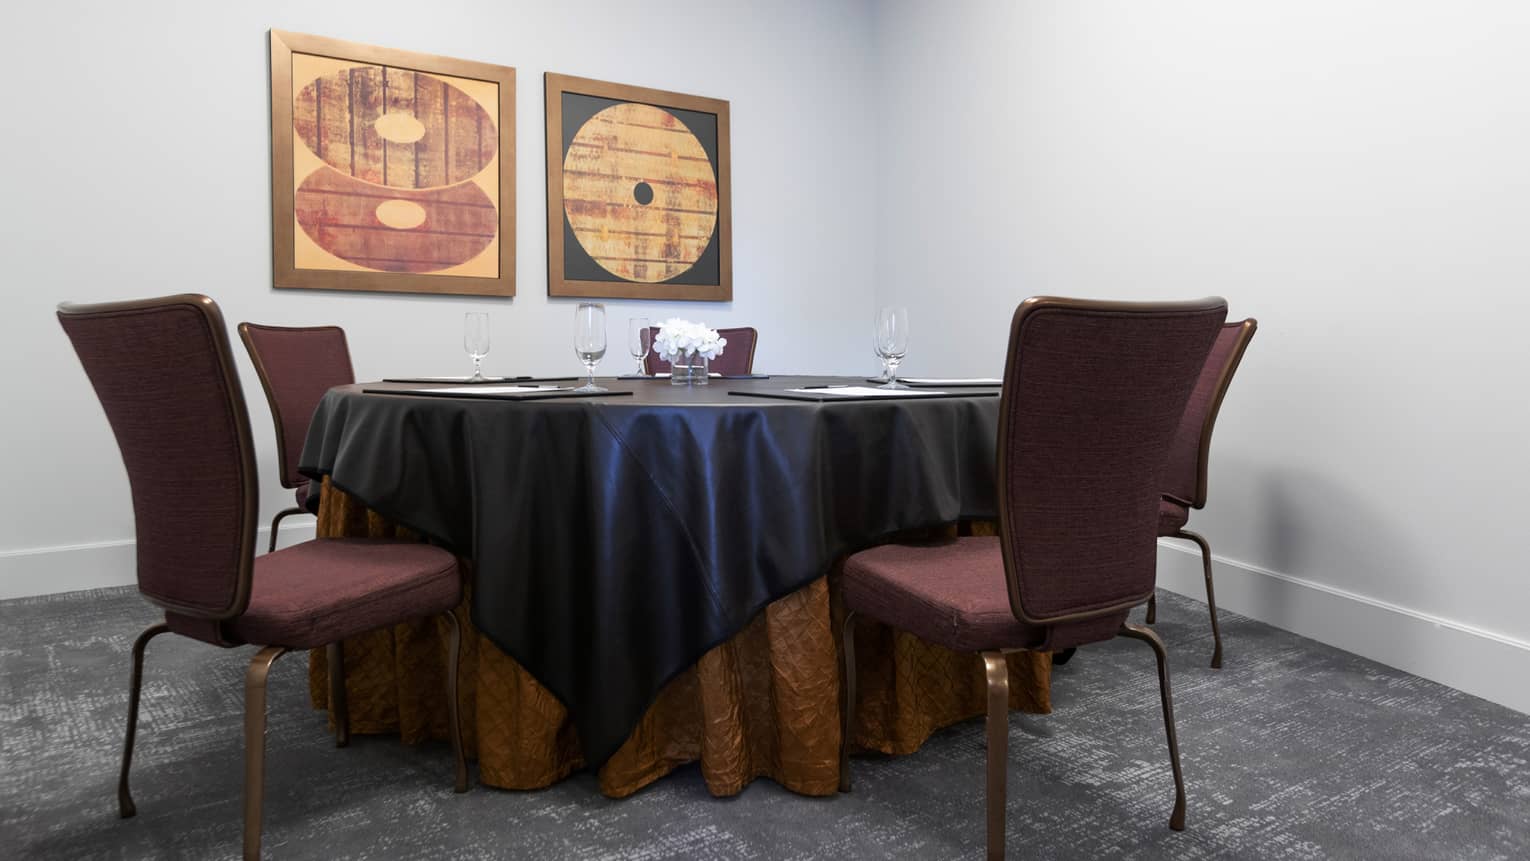 A round meeting table surrounded by four chairs, with two pieces of art on the wall.